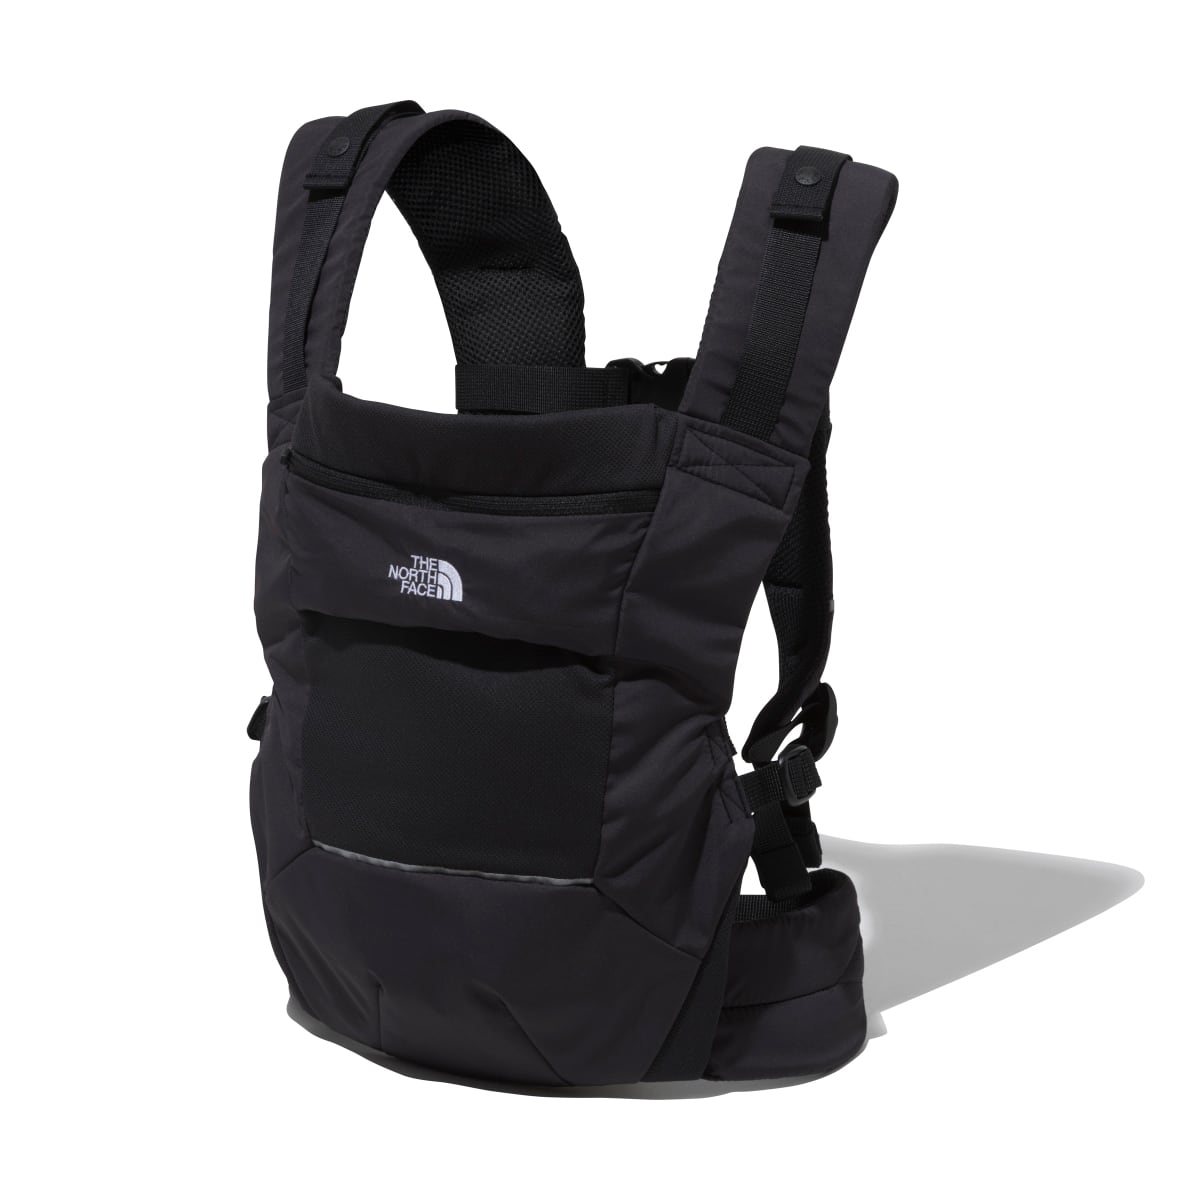 THE NORTH FACE BABY COMPACT CARRIER BLACK 23SS-I_photo_large